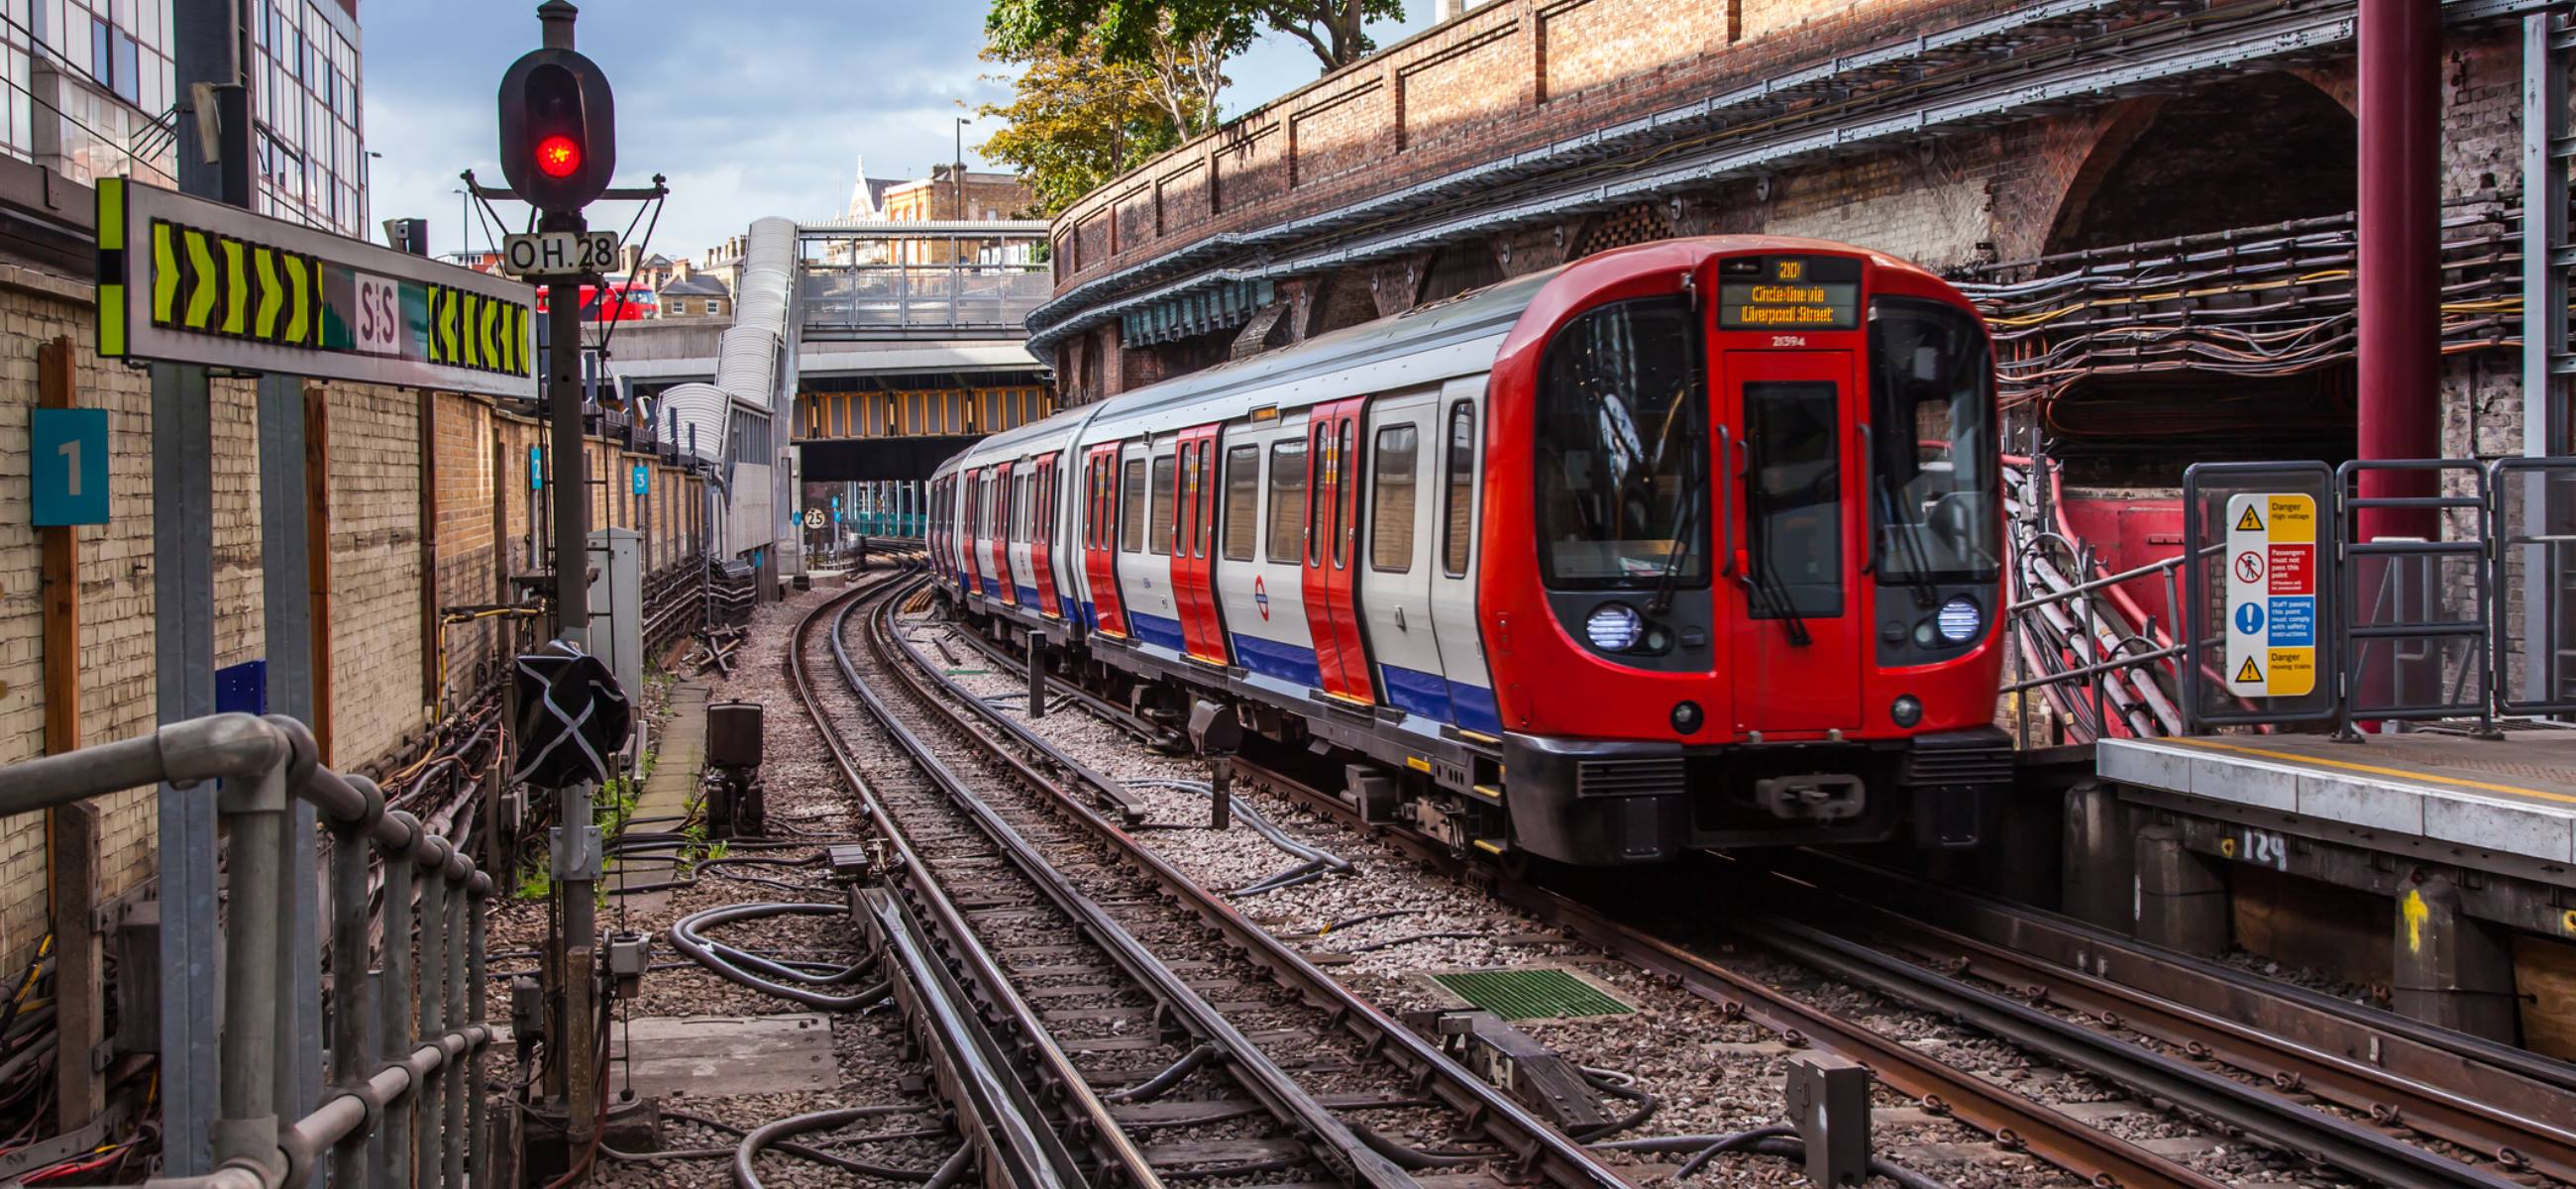 Exploring-the-Underground Stations-Of-The-London-Tube-Network